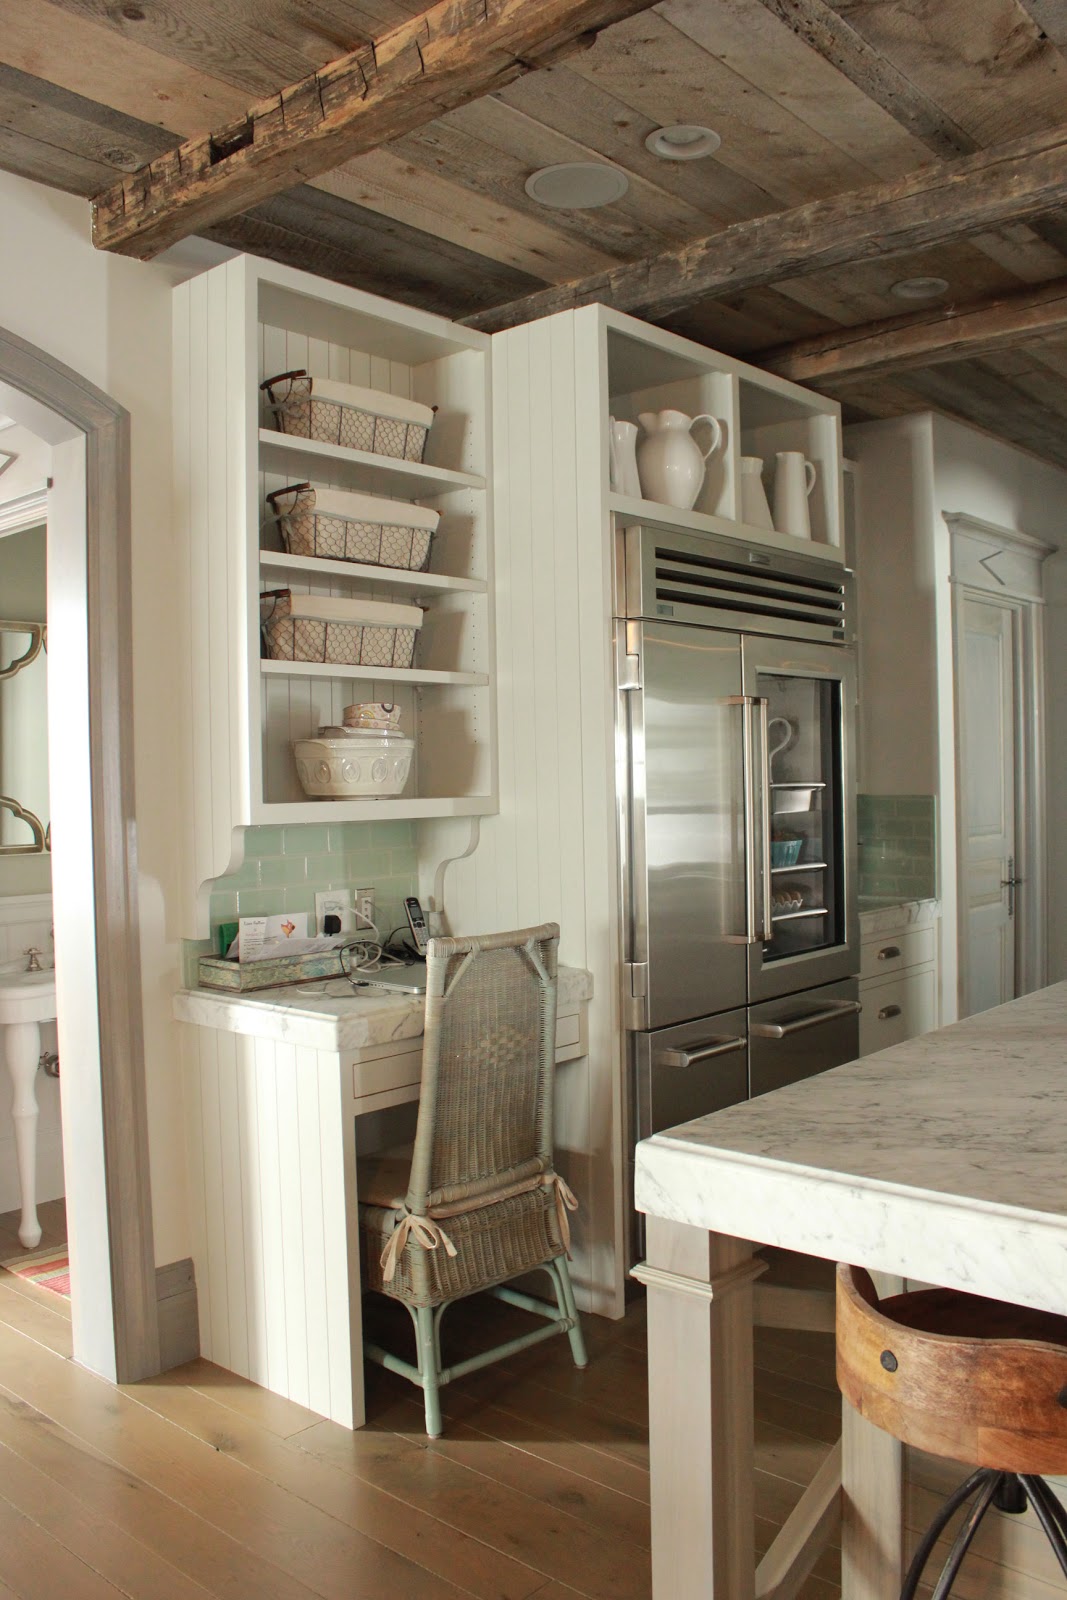 Magnificent Gustavian French kitchen in stone cottage with rustic interiors, reclaimed wood ceilings, blue-grey, green, and collected European antiques. Designed by Desiree Ashworth. Find ideas for grey, blue, and green paint colors.